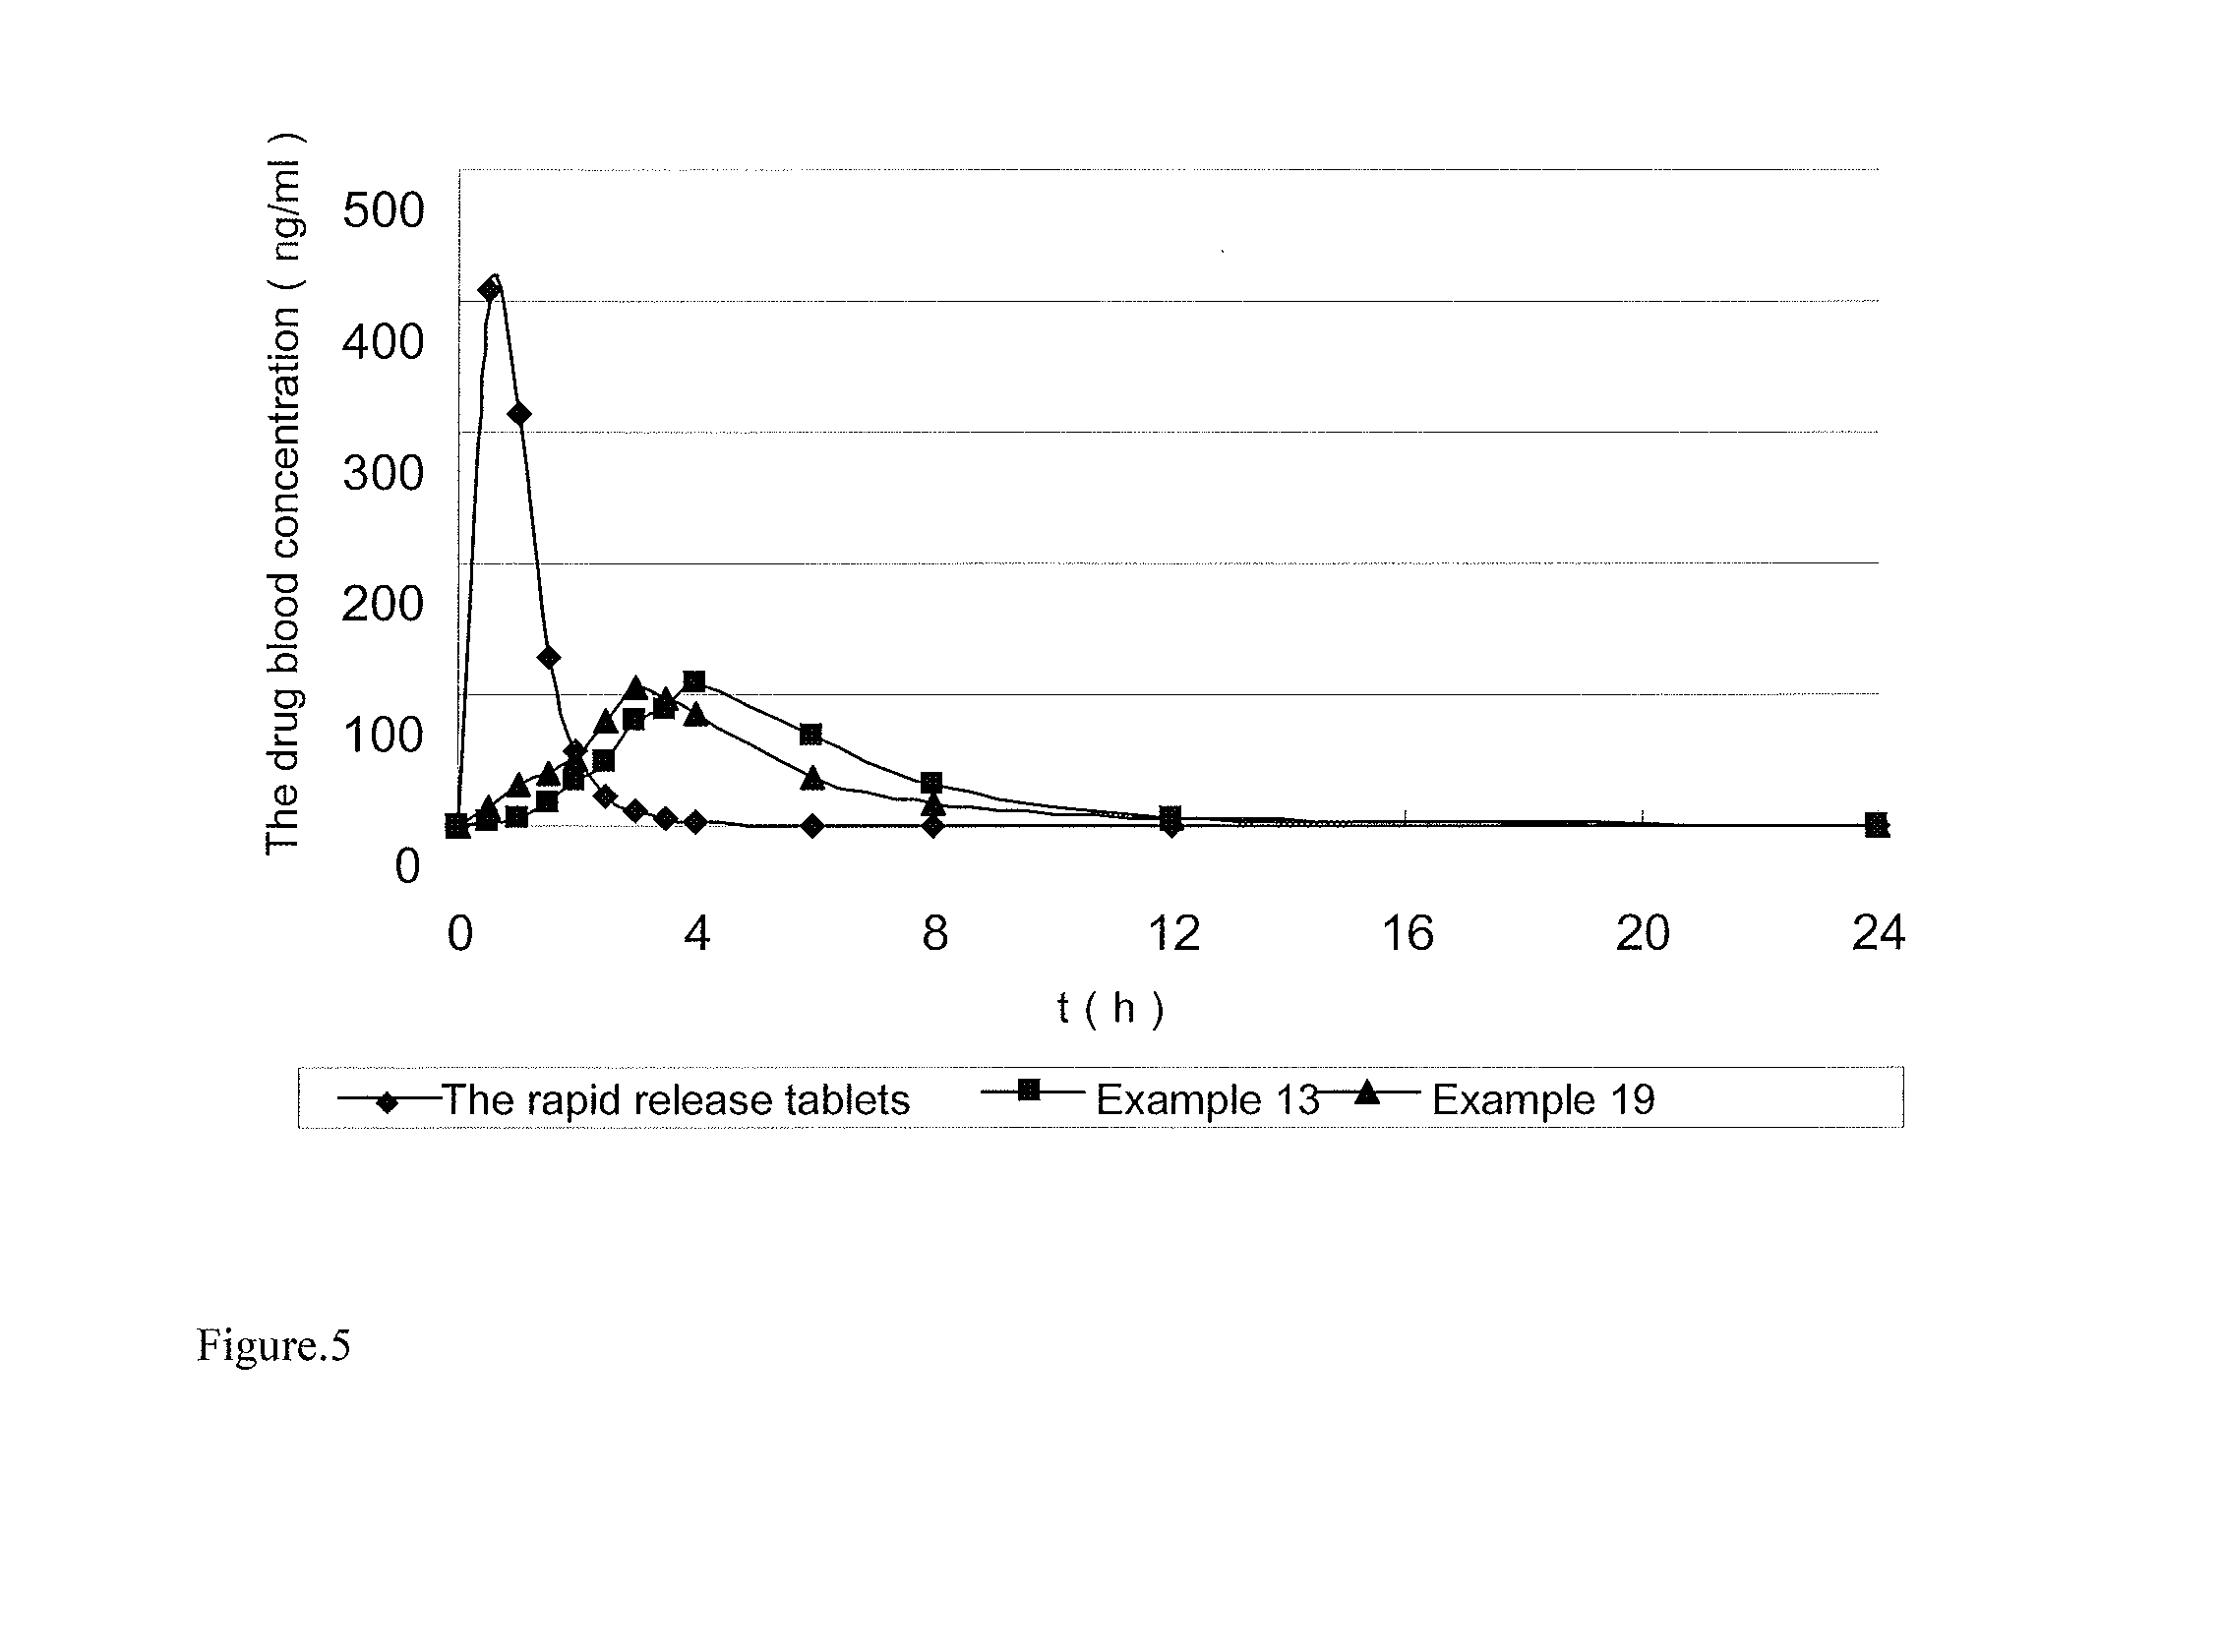 Sustained-release preparation of ivabradine or pharmaceutically acceptable salts thereof